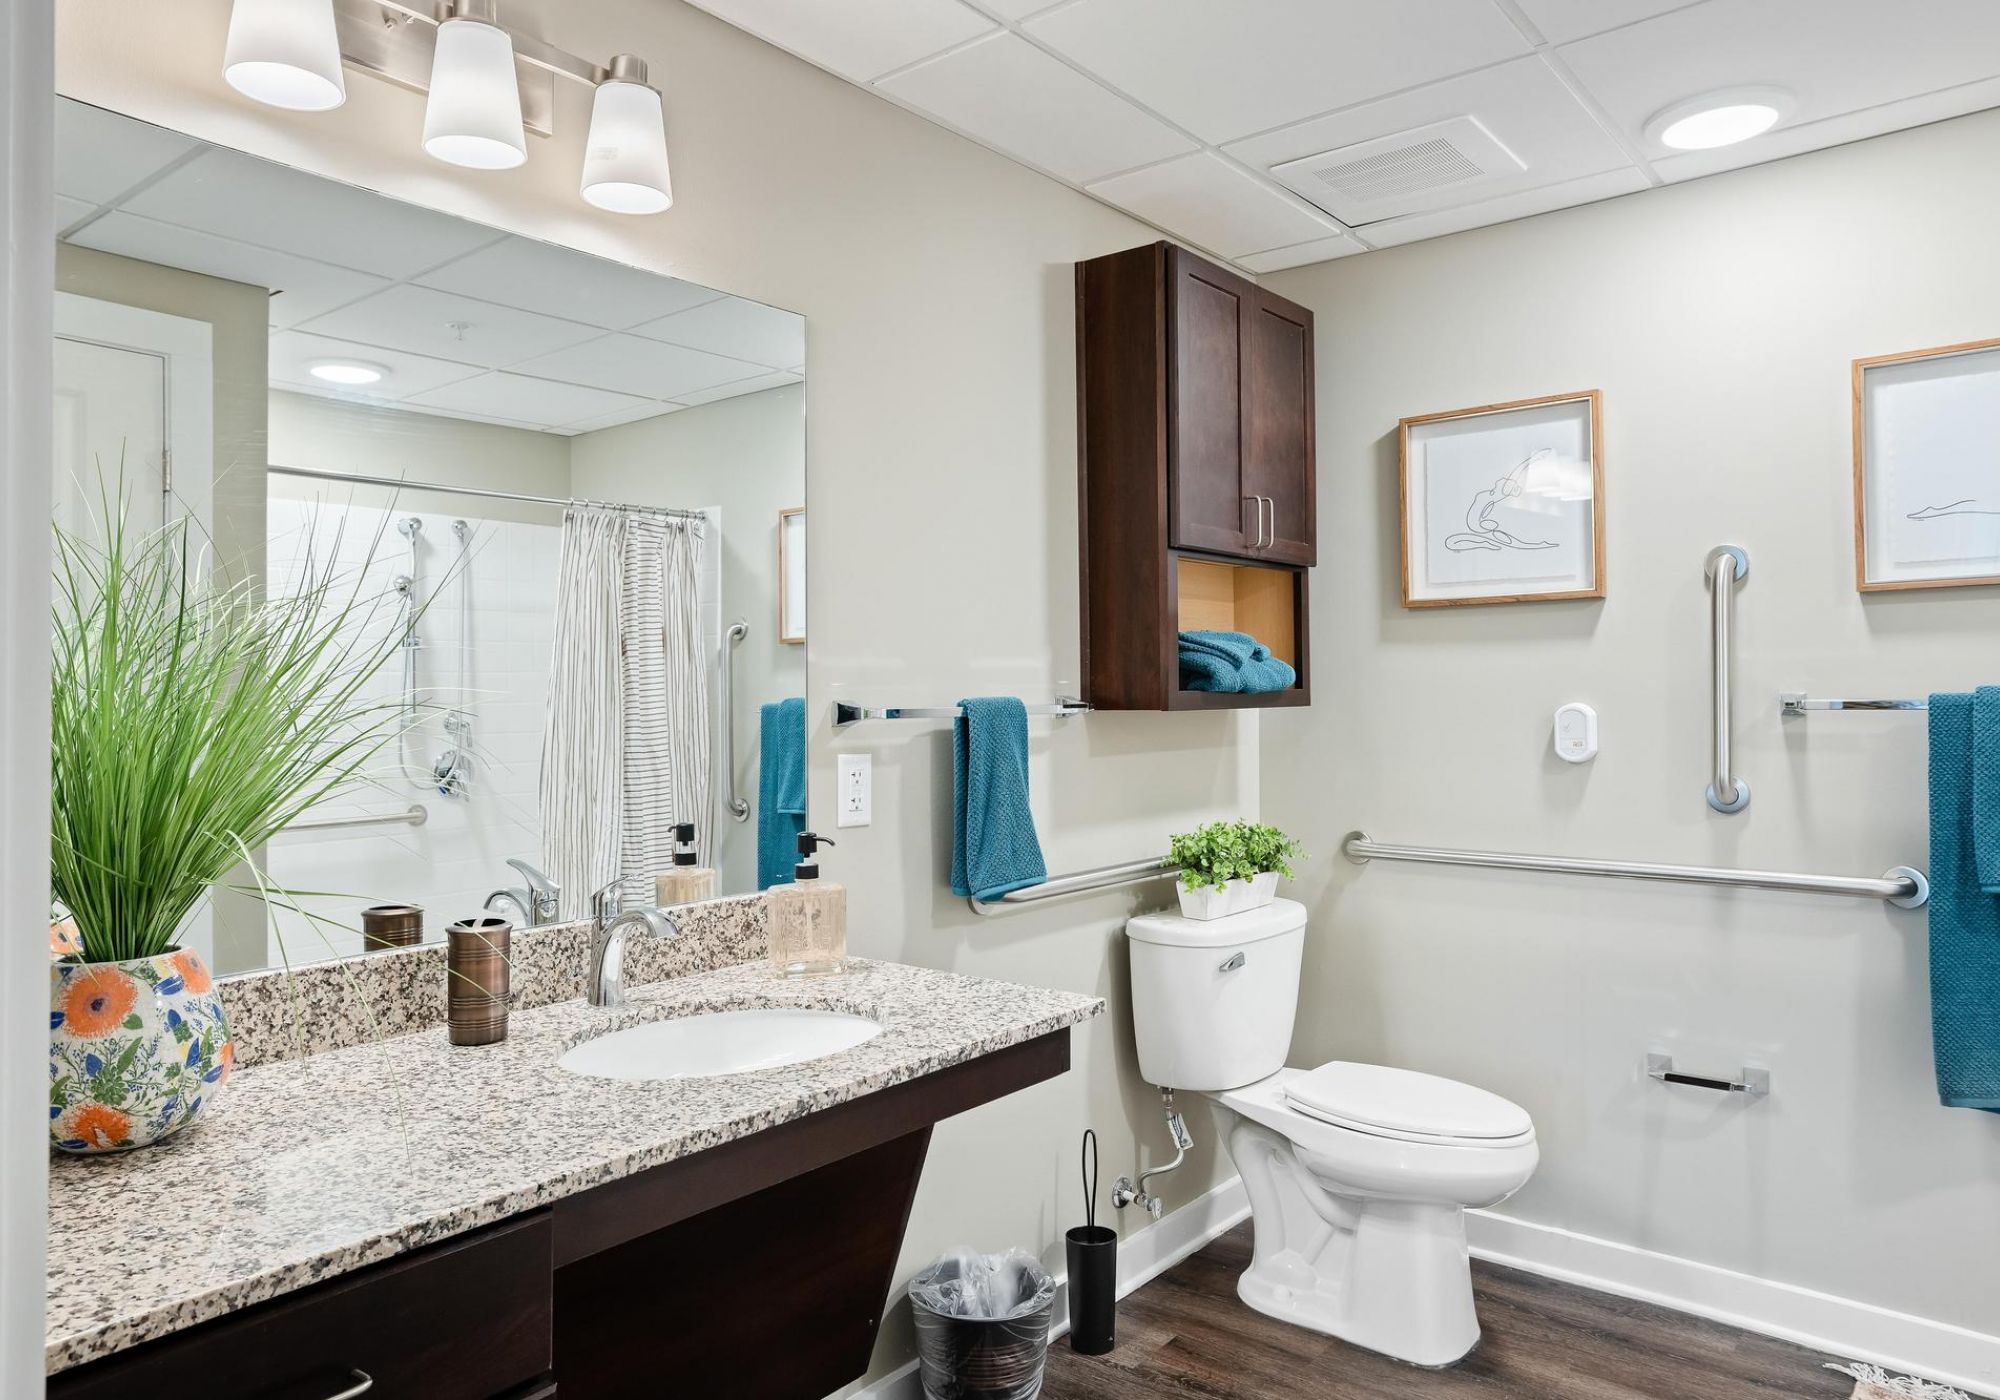 The Claiborne at Brickyard Crossing senior living community bathroom showing accessibility features including handrails, lower sink height, and zero-entry shower